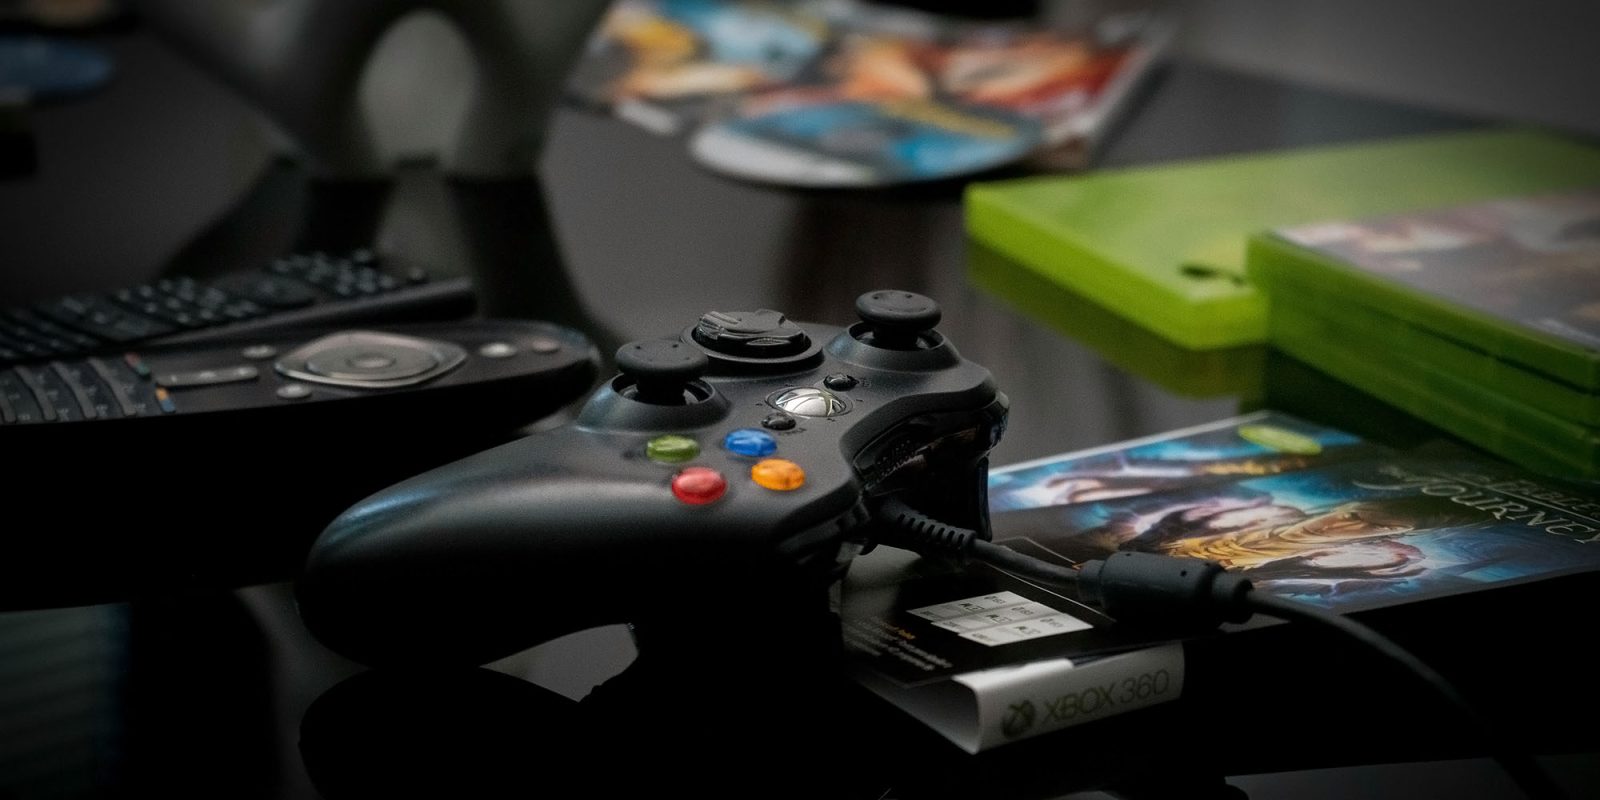 Microsoft iOS app store | Game controller on desk with games